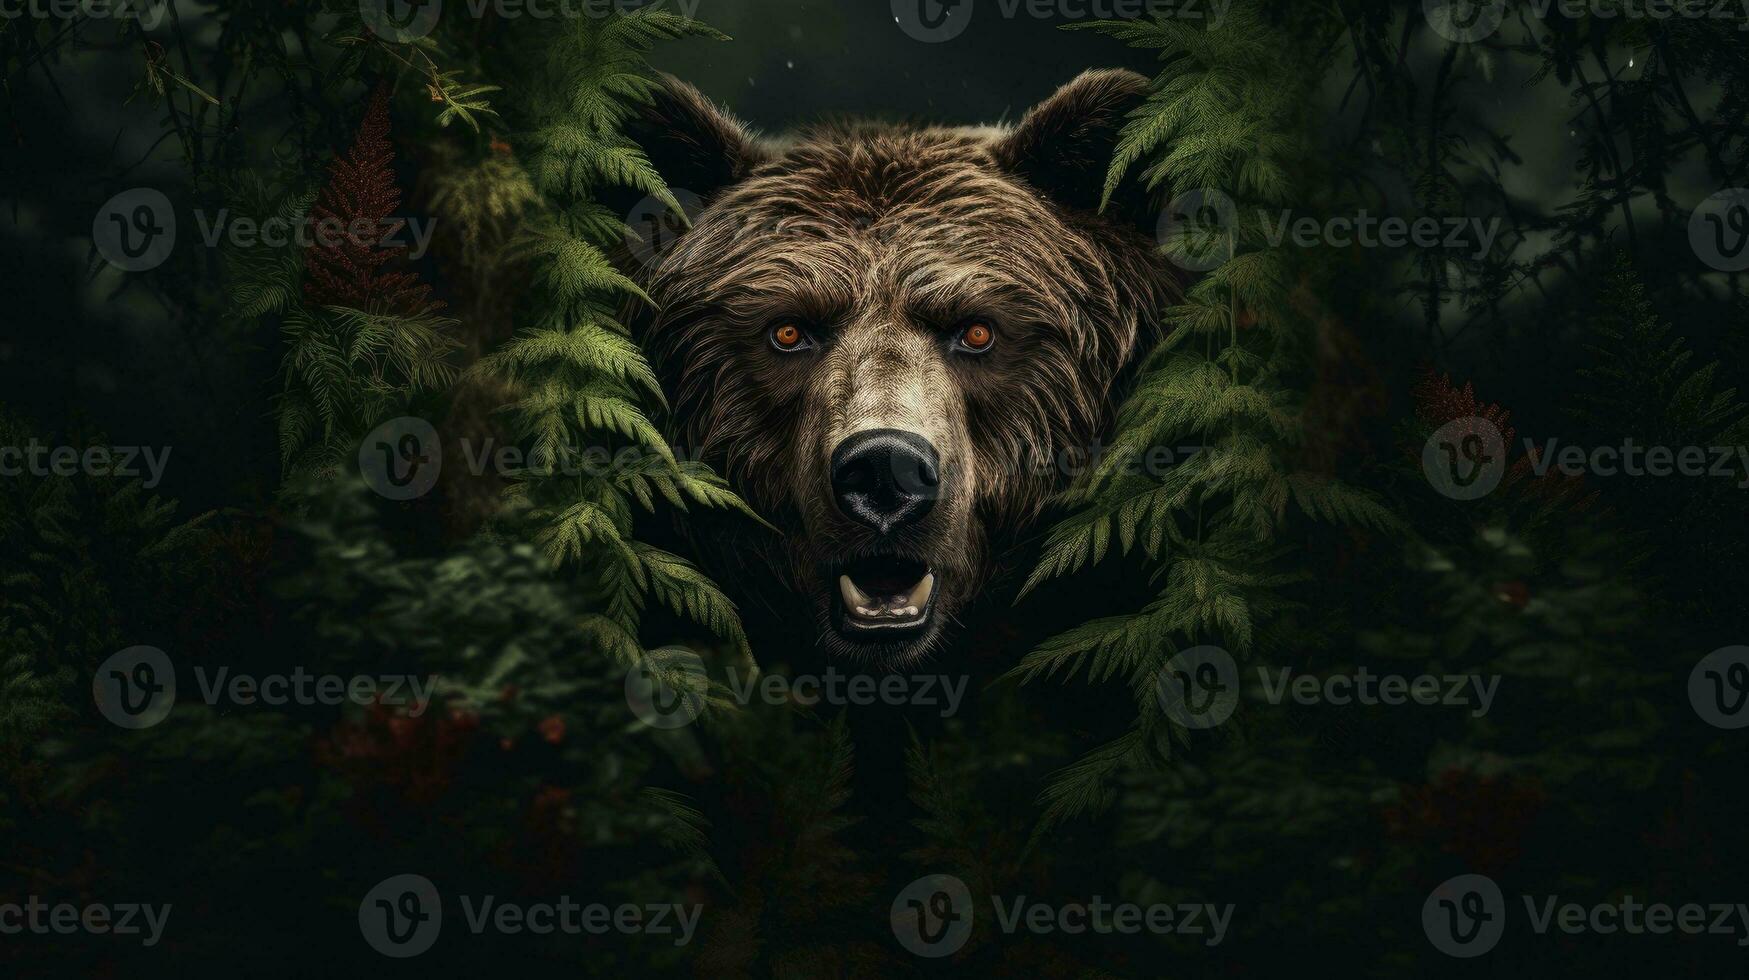 Frontal view of a bear in the forest photo